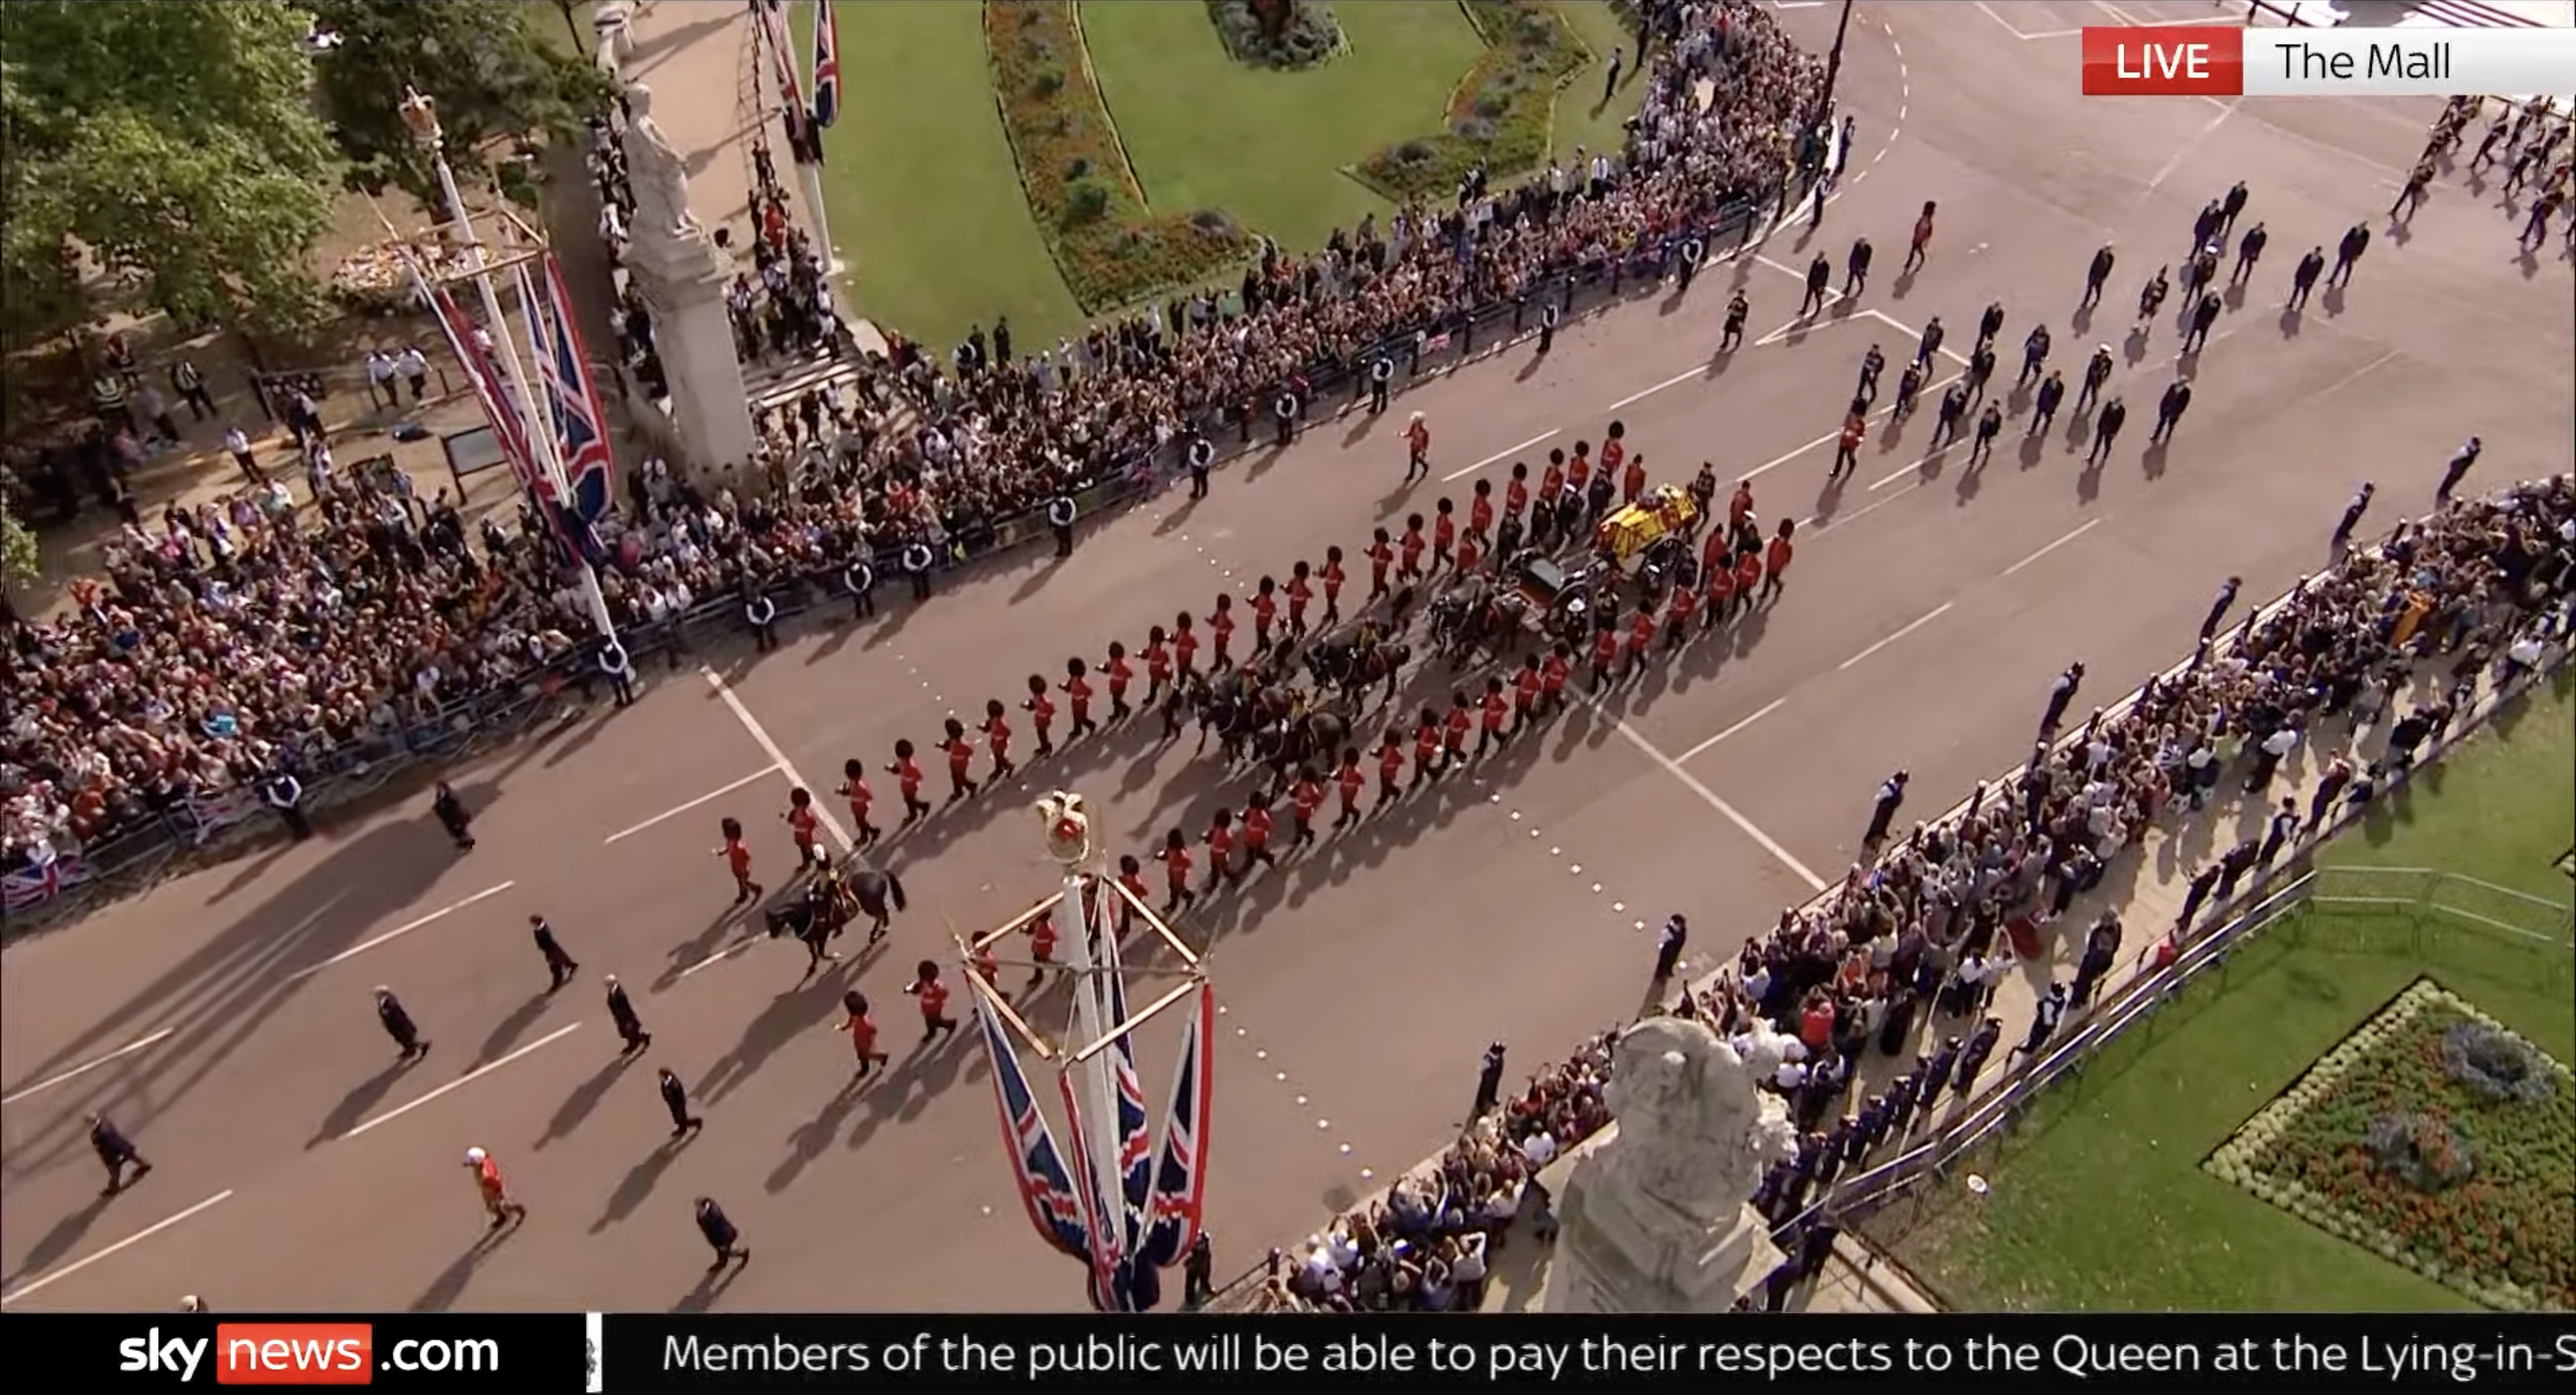 A still frame of the Queen's cortège from Sky News.